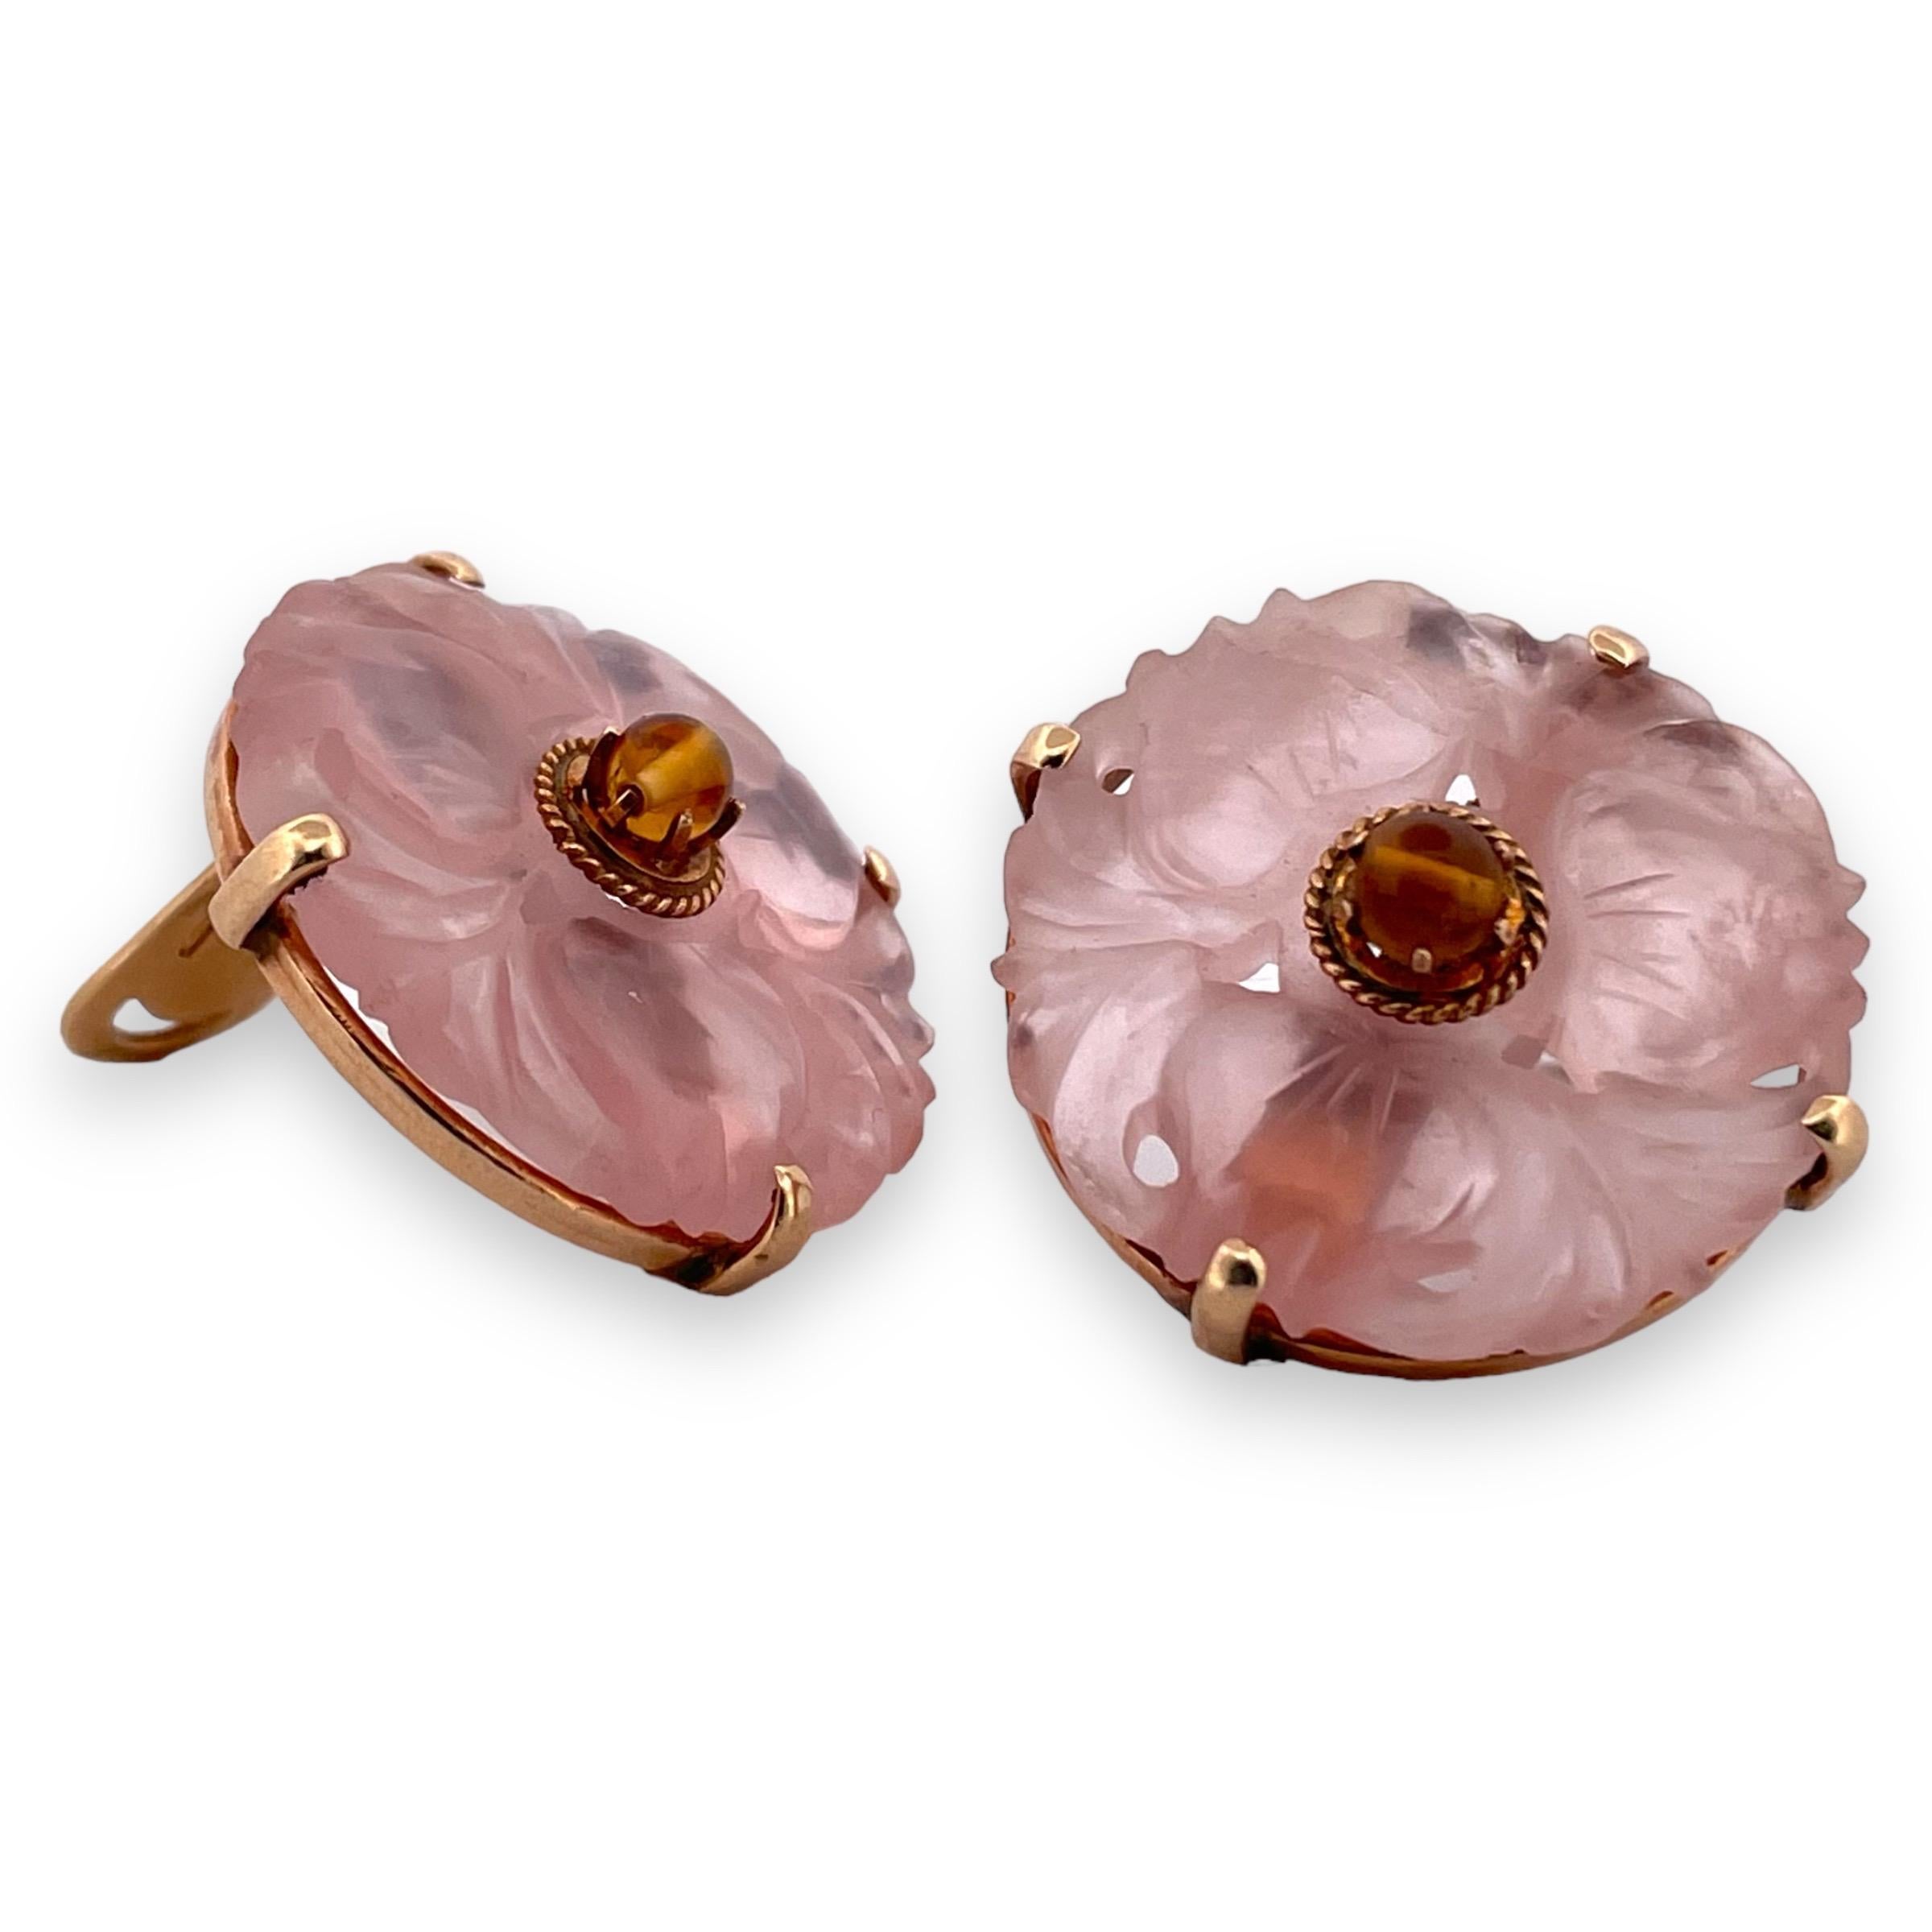 Discover the enchanting beauty of these round clip-on earrings, featuring delicate rosy pink quartz set in polished 14K yellow gold. These earrings offer a touch of soft, feminine charm with their warm blush tones, making them a delightful addition